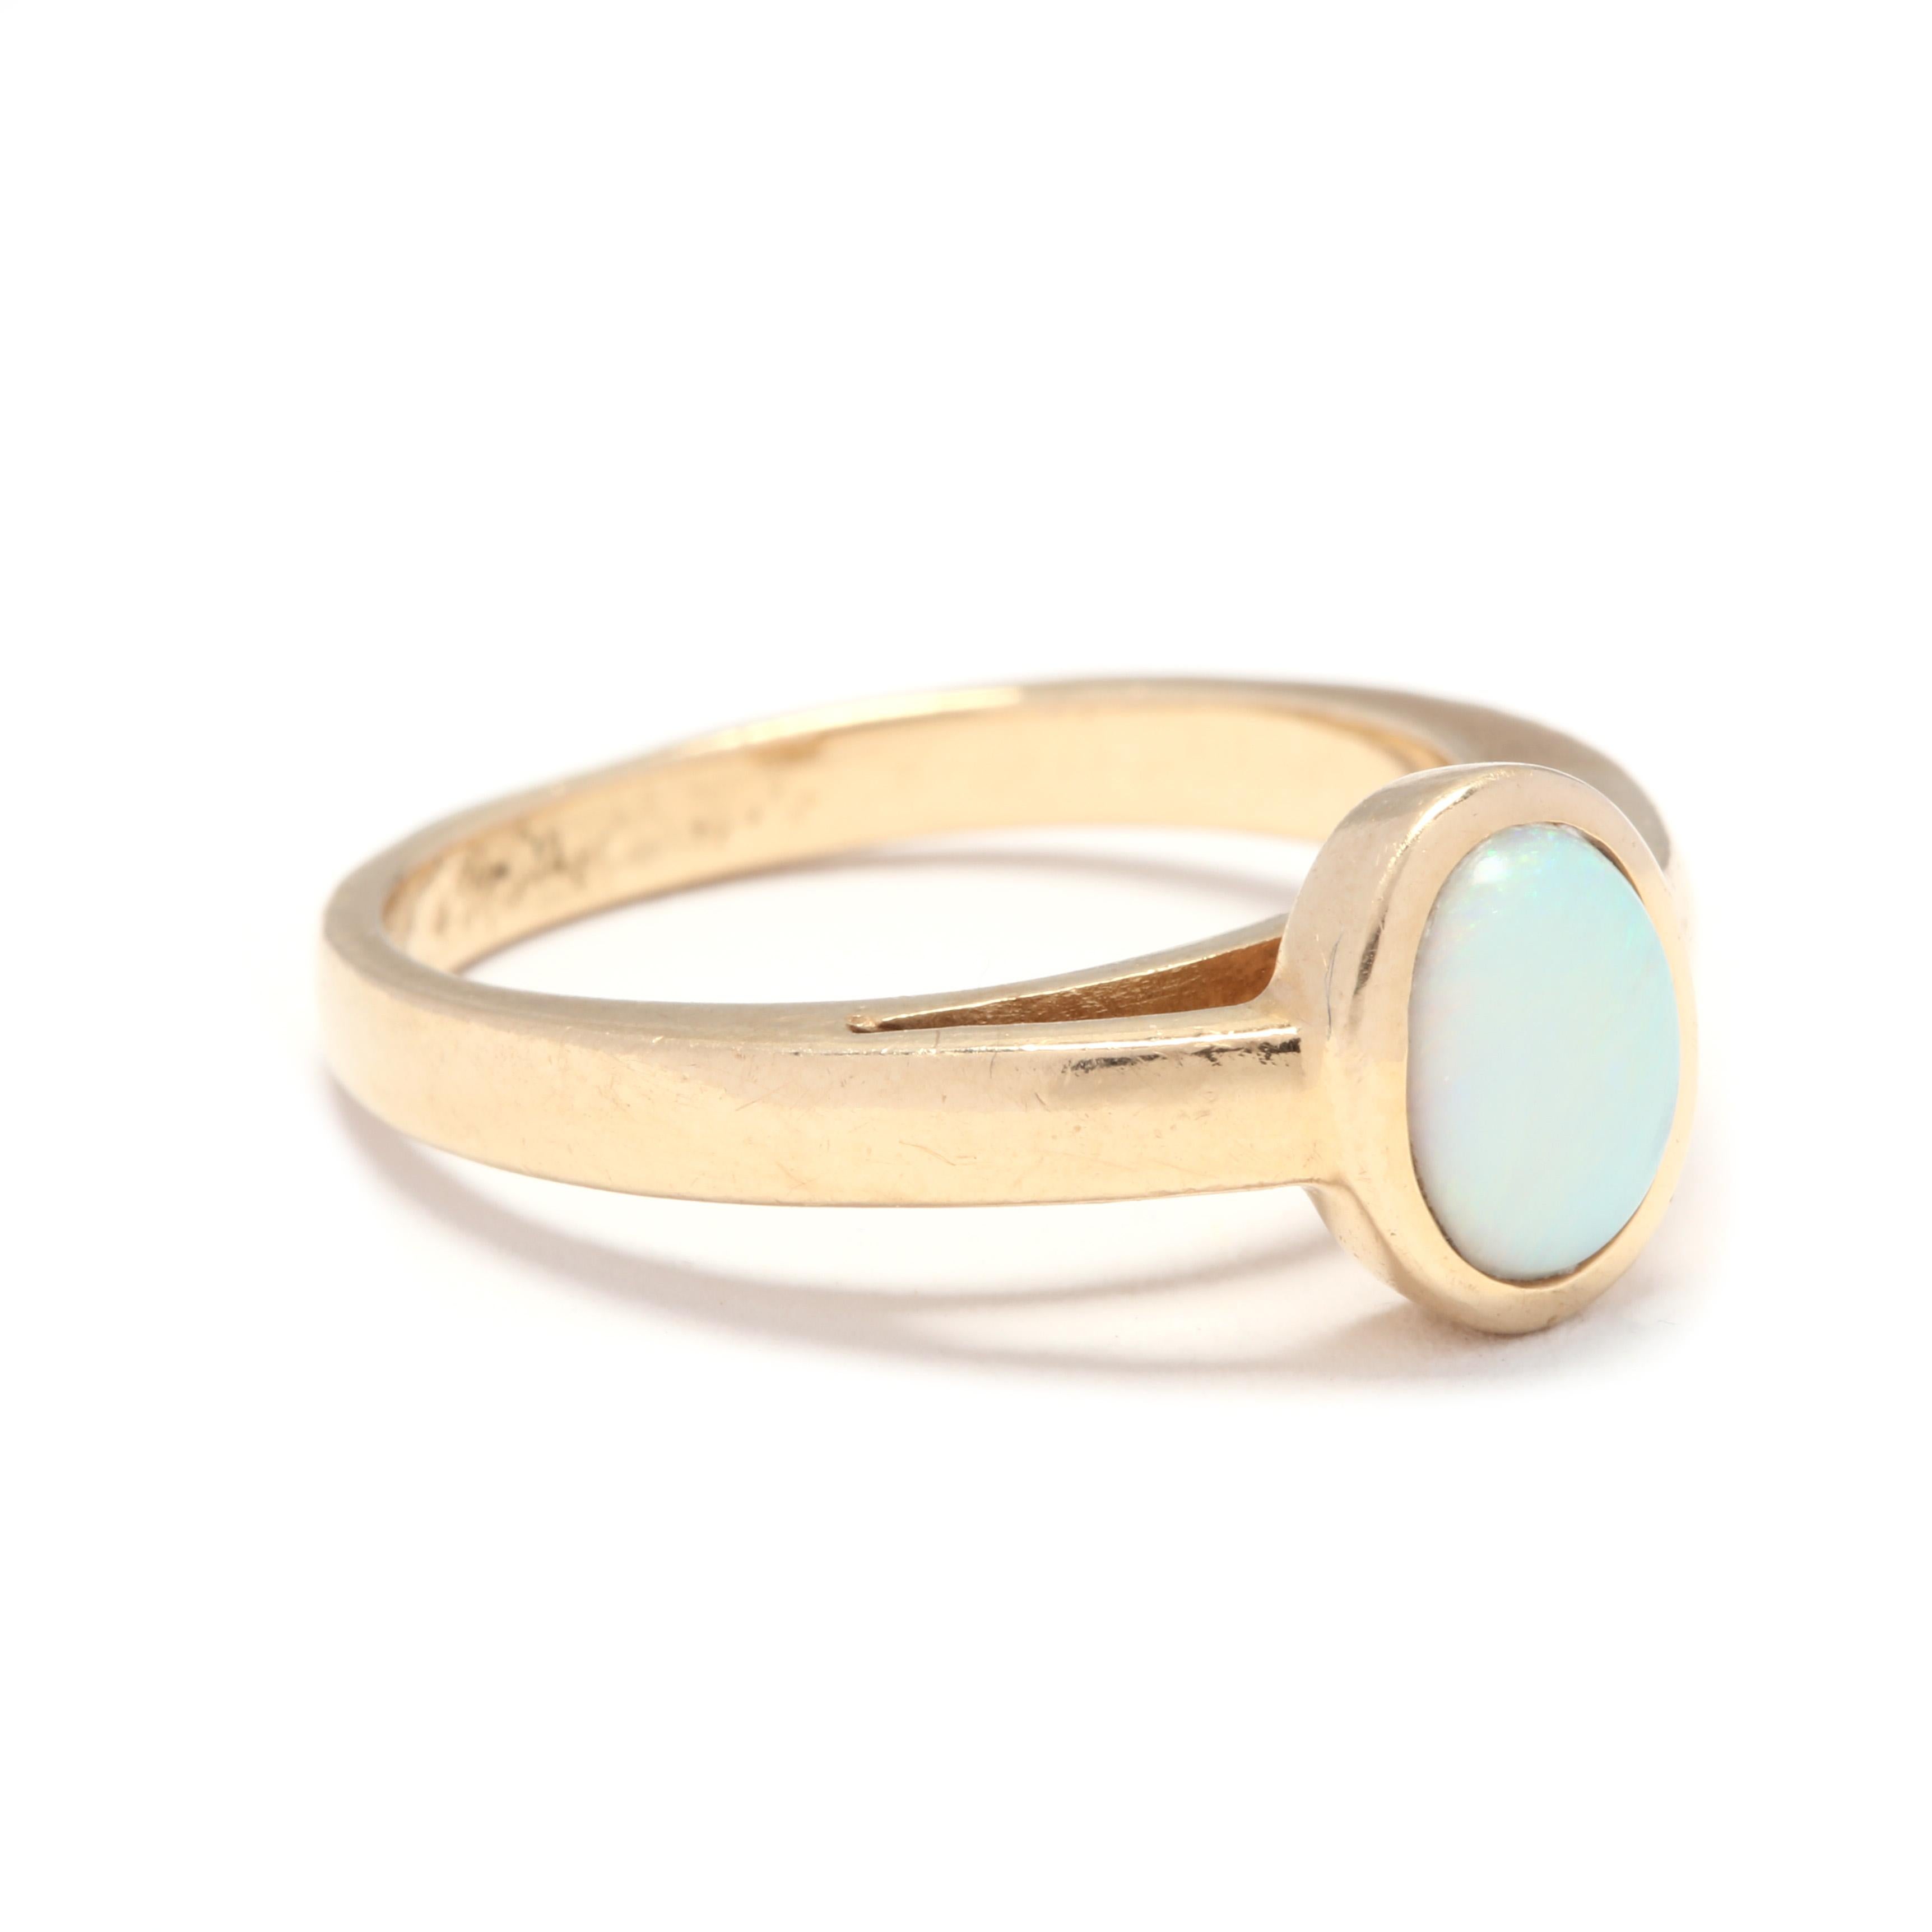 A 14 karat yellow gold and opal solitaire bezel ring. This ring features an oval cabochon opal that is bezel set and suspended above a polished band.

Stones:
- opal
- oval cabochon, 1 stone
- 7 x 5.15 mm

Ring Size 6.25

2.84 dwts.

* Please note